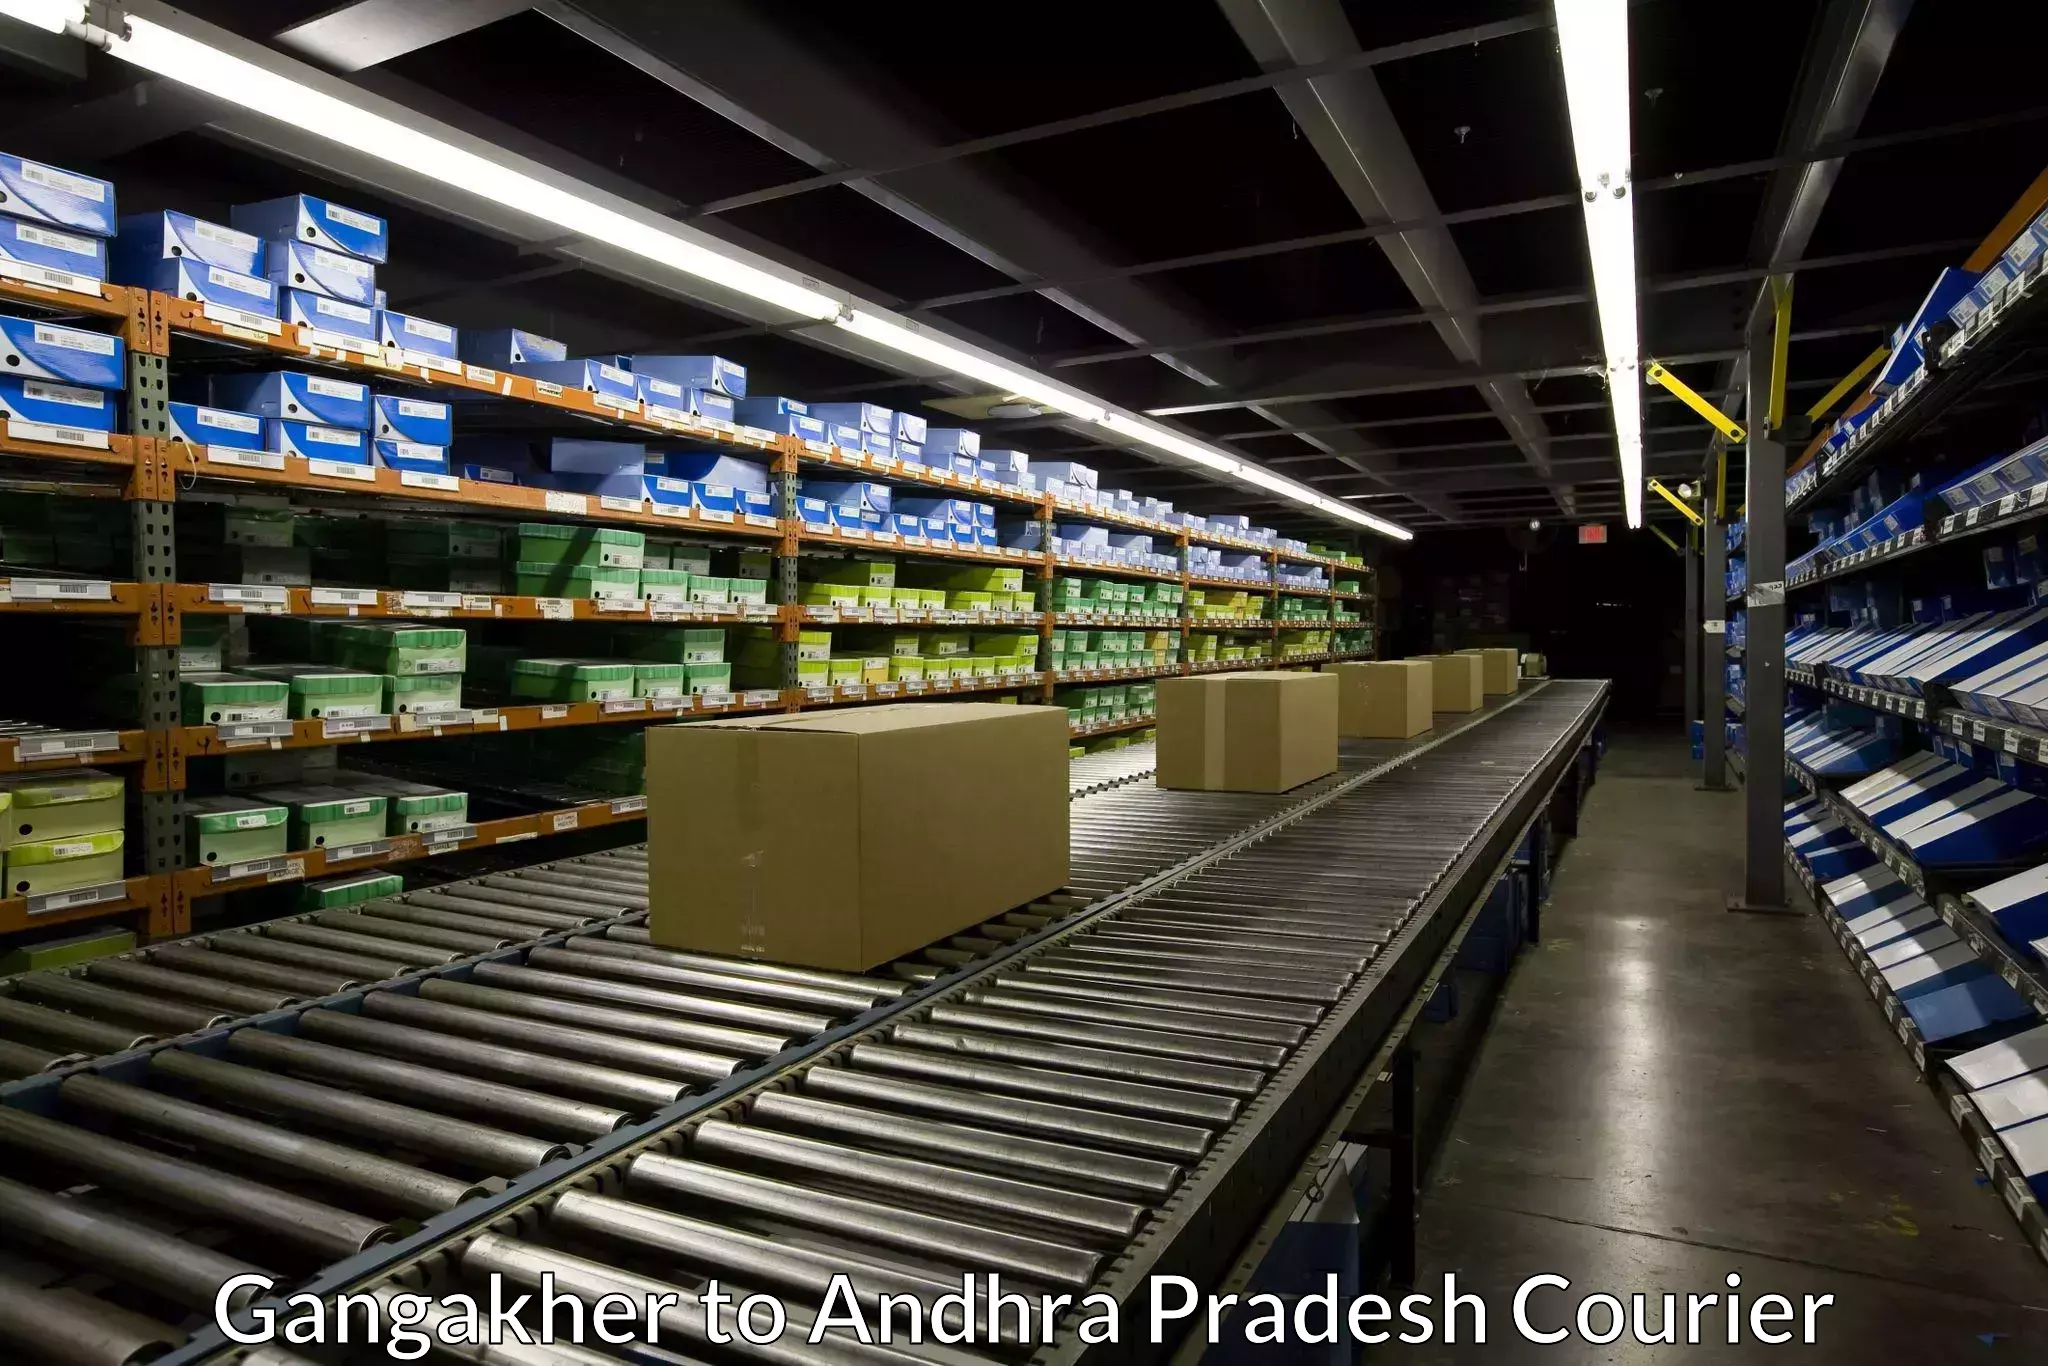 Automated parcel services Gangakher to Andhra Pradesh